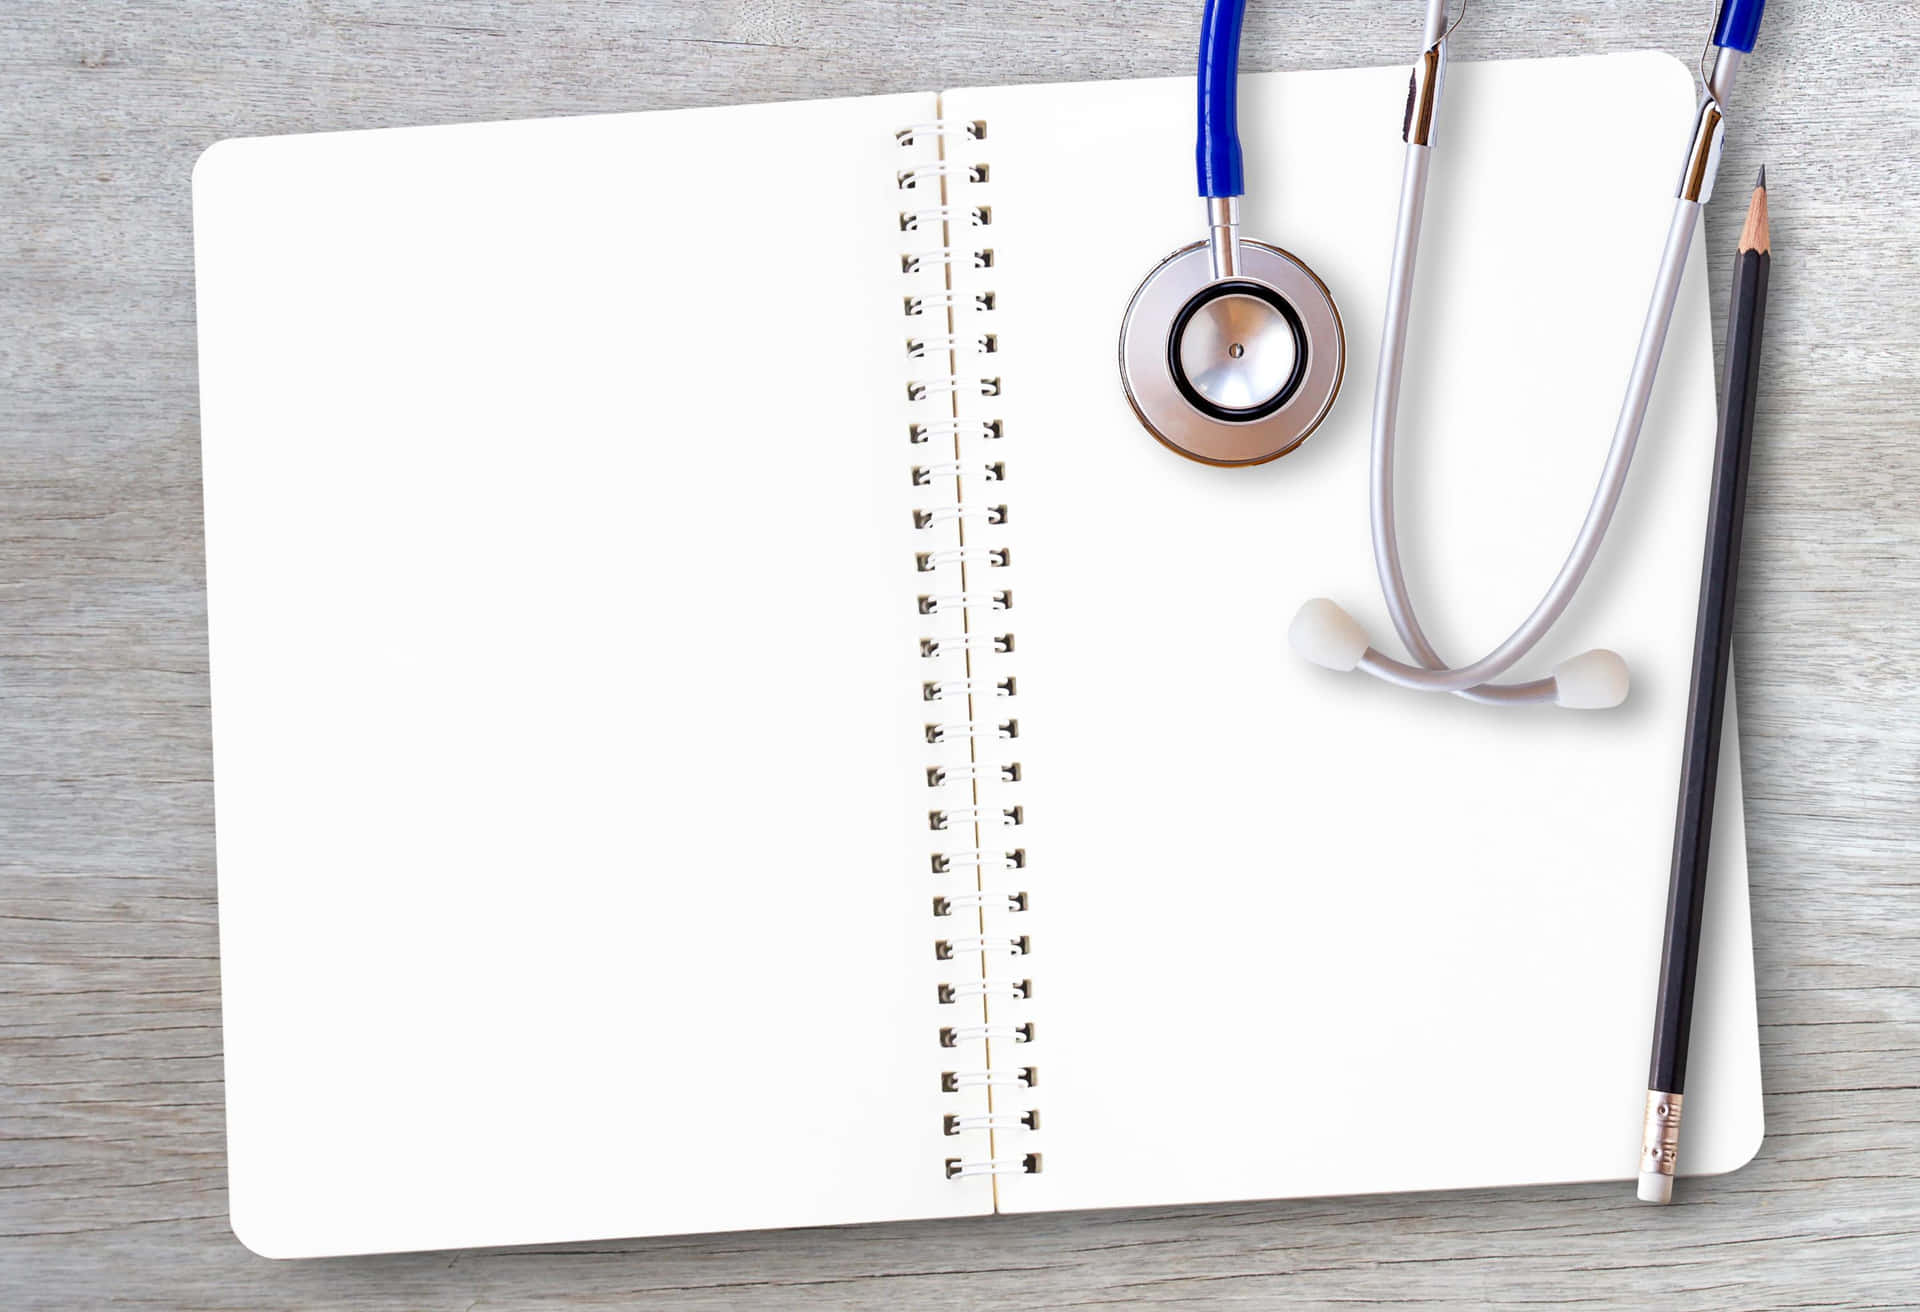 A Blank Notebook With A Stethoscope And Pen On A Wooden Table